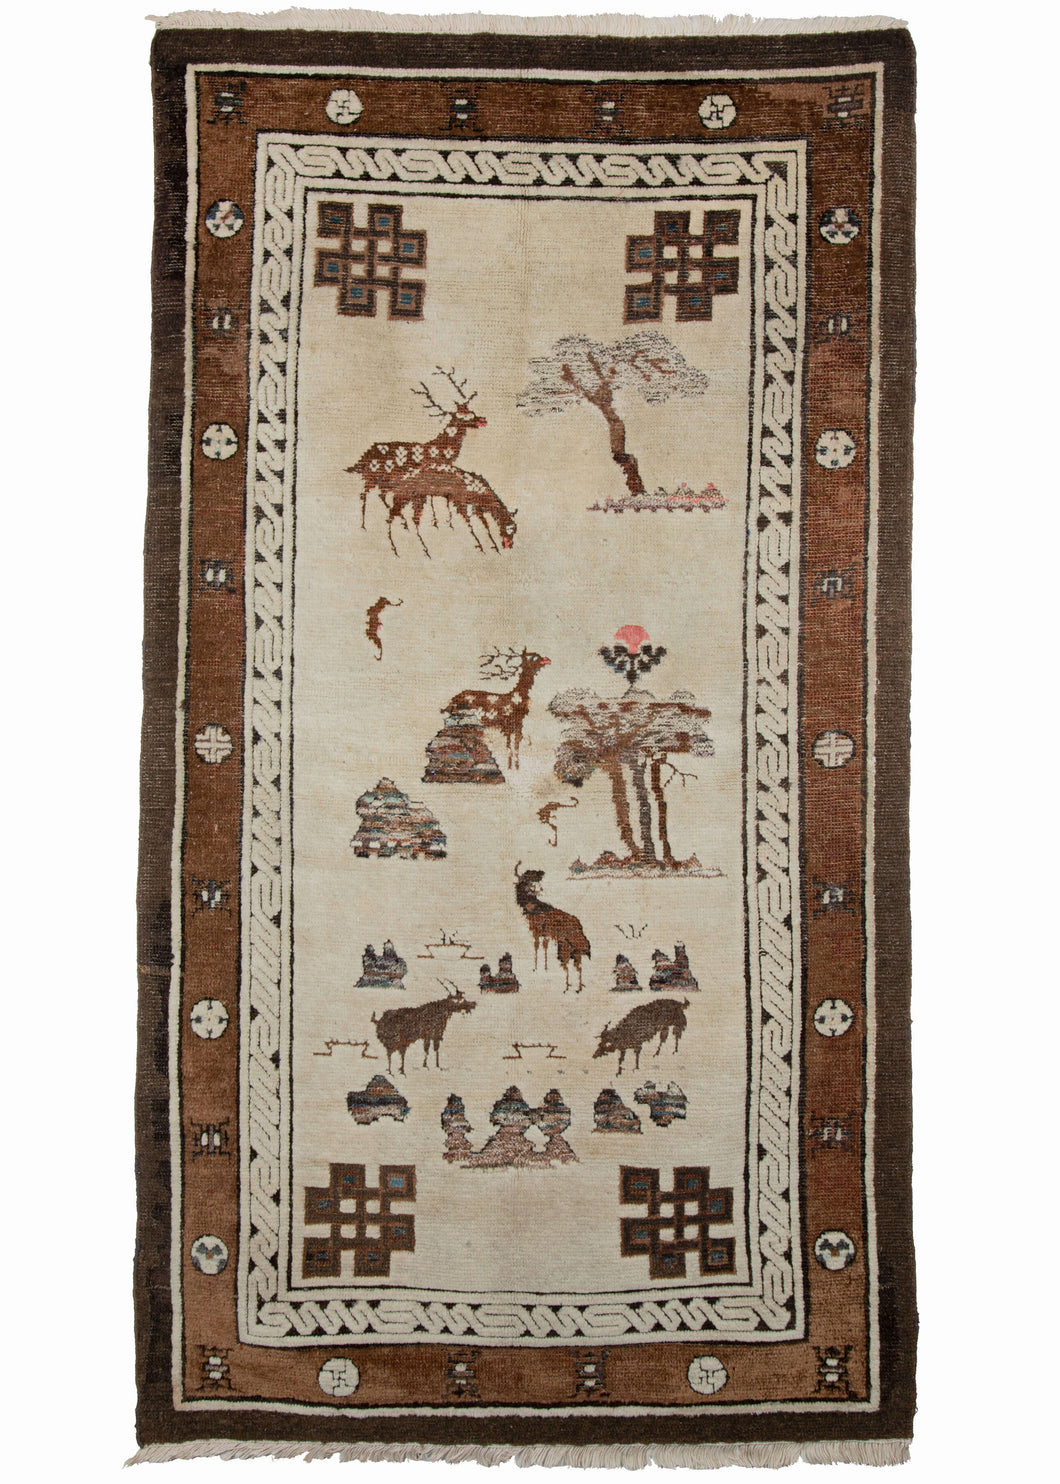 19th century small Mongolian rug depicting a natural scene primarily of a variety of animals among trees and stones. Among the animals, deer, bats, goats and a pig can be found. The stones have the appearance of scholars' stones and are rendered in a lovely combination of blues, purples, and browns. Four eternal knots can be found in each corner. 